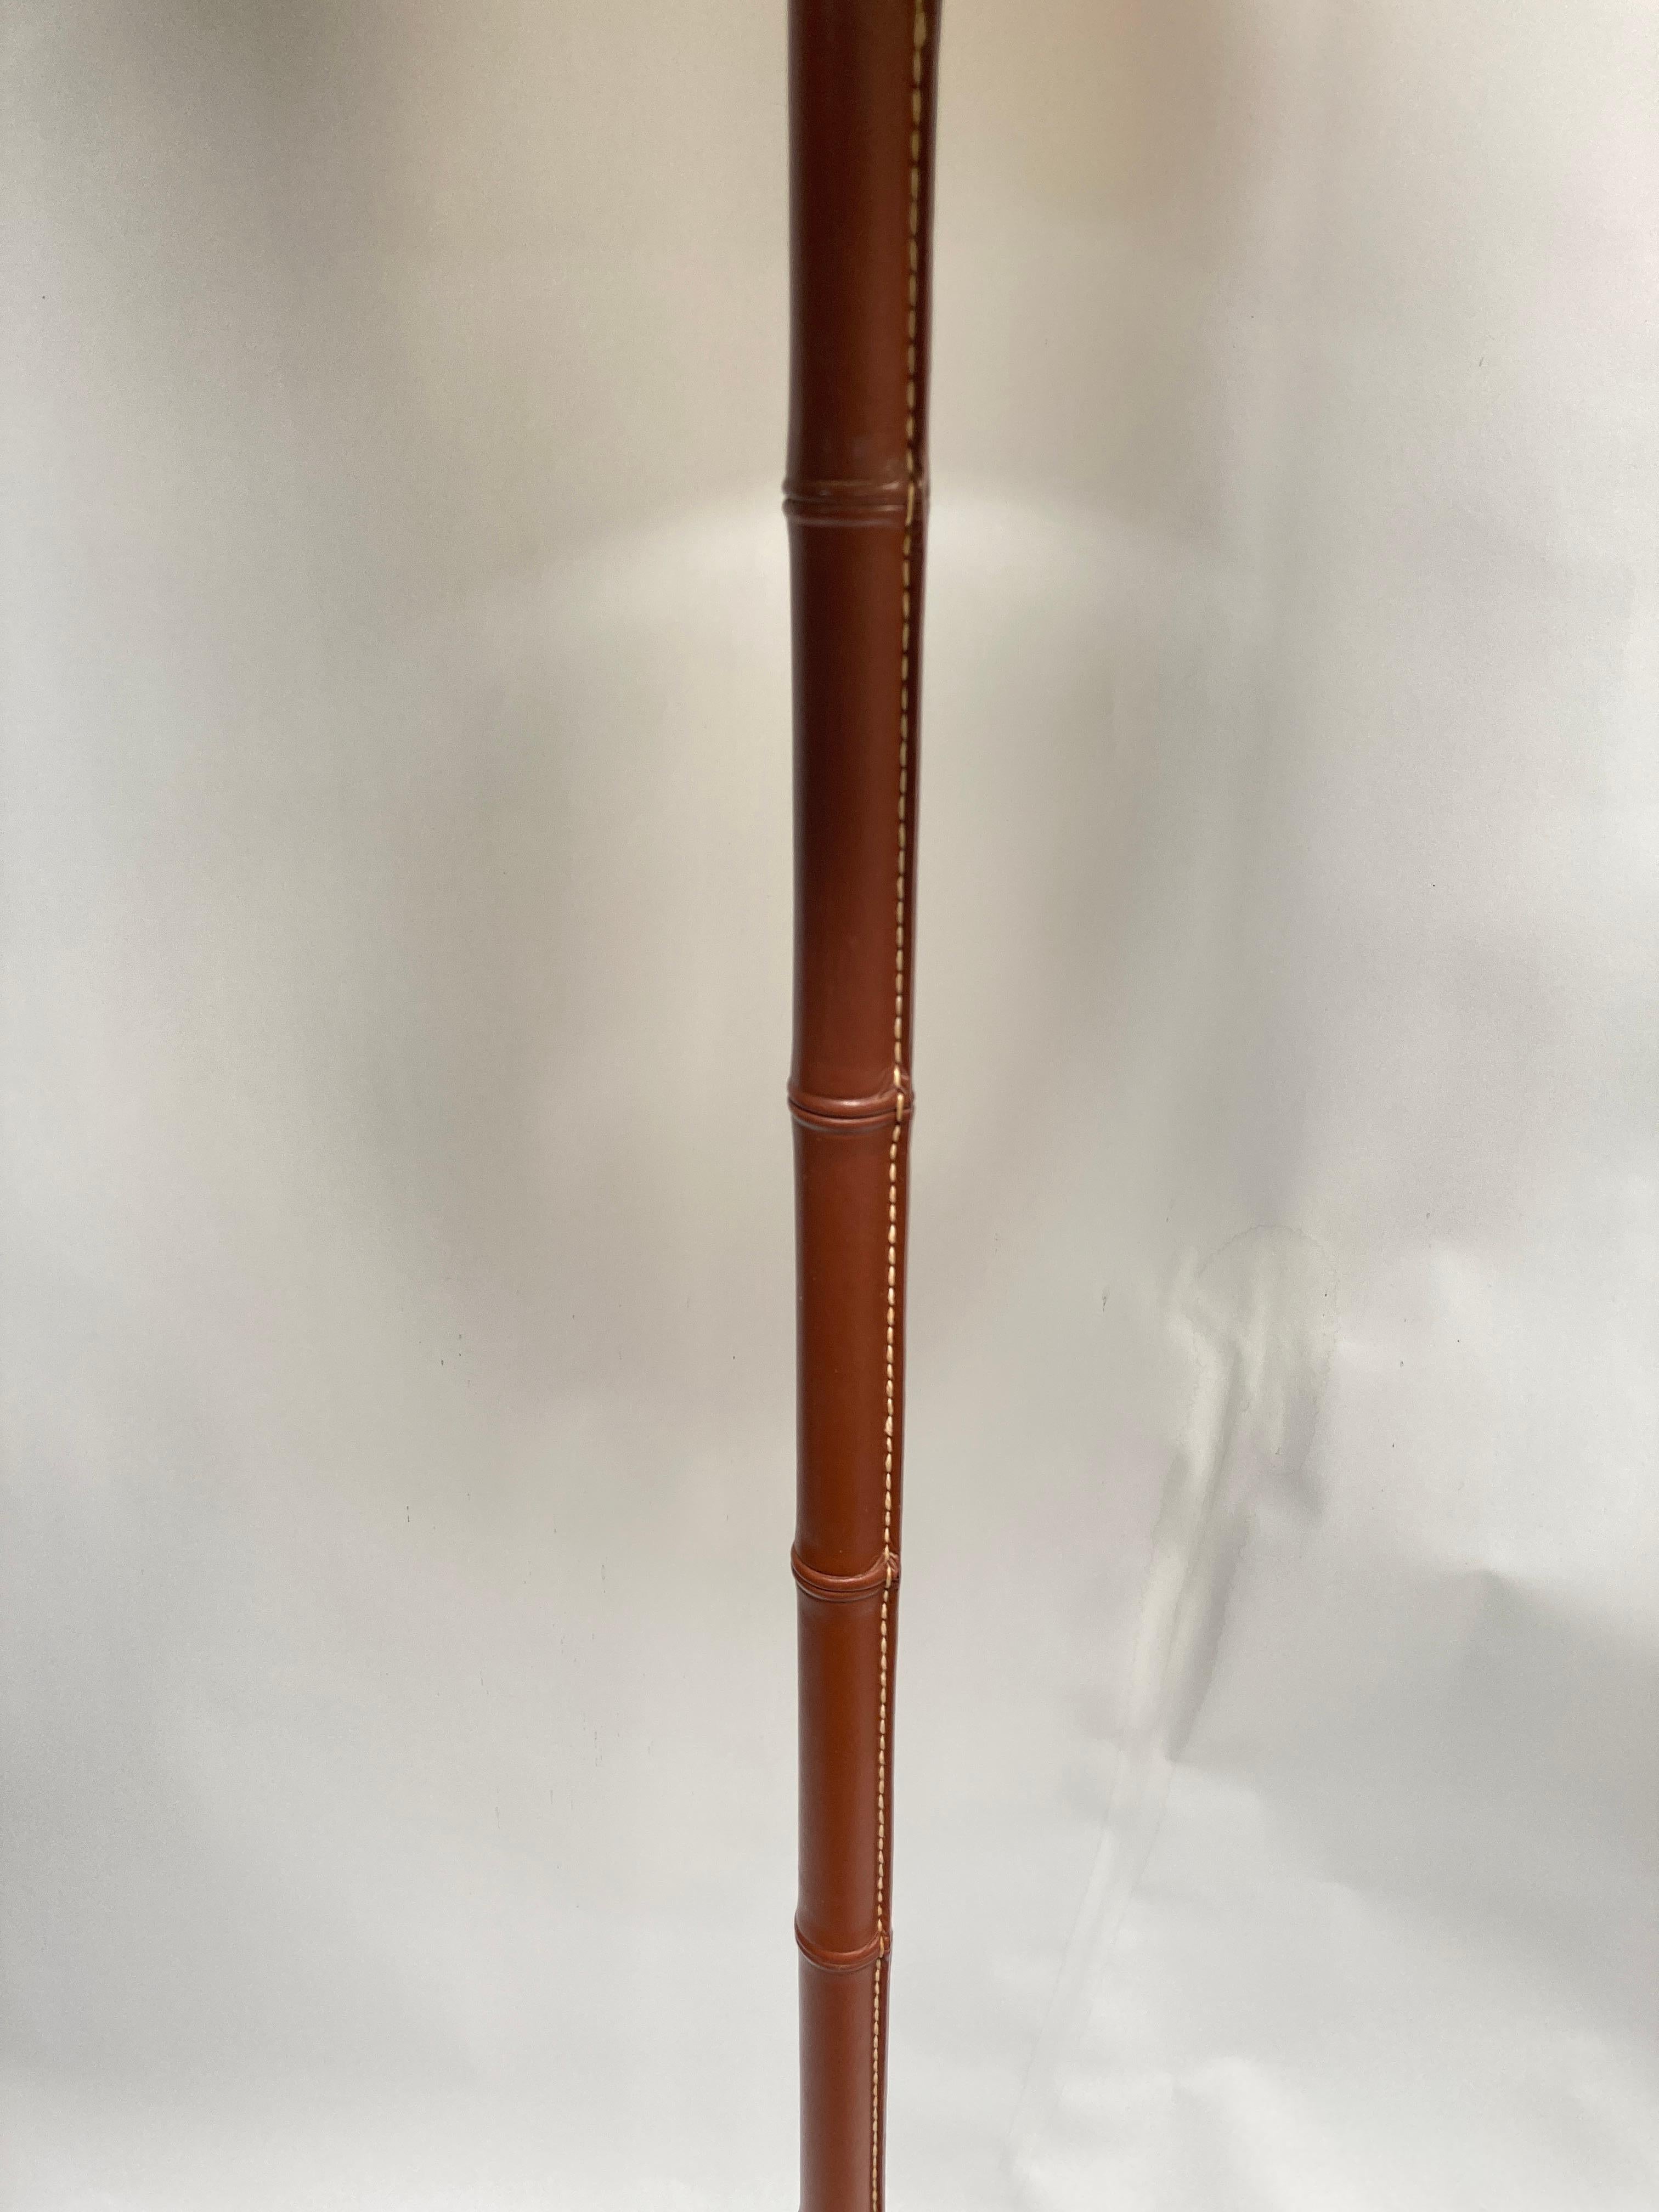 Very nice stitched leather floor lamp 
Very good condition
No shade included , Dimensions given without shade